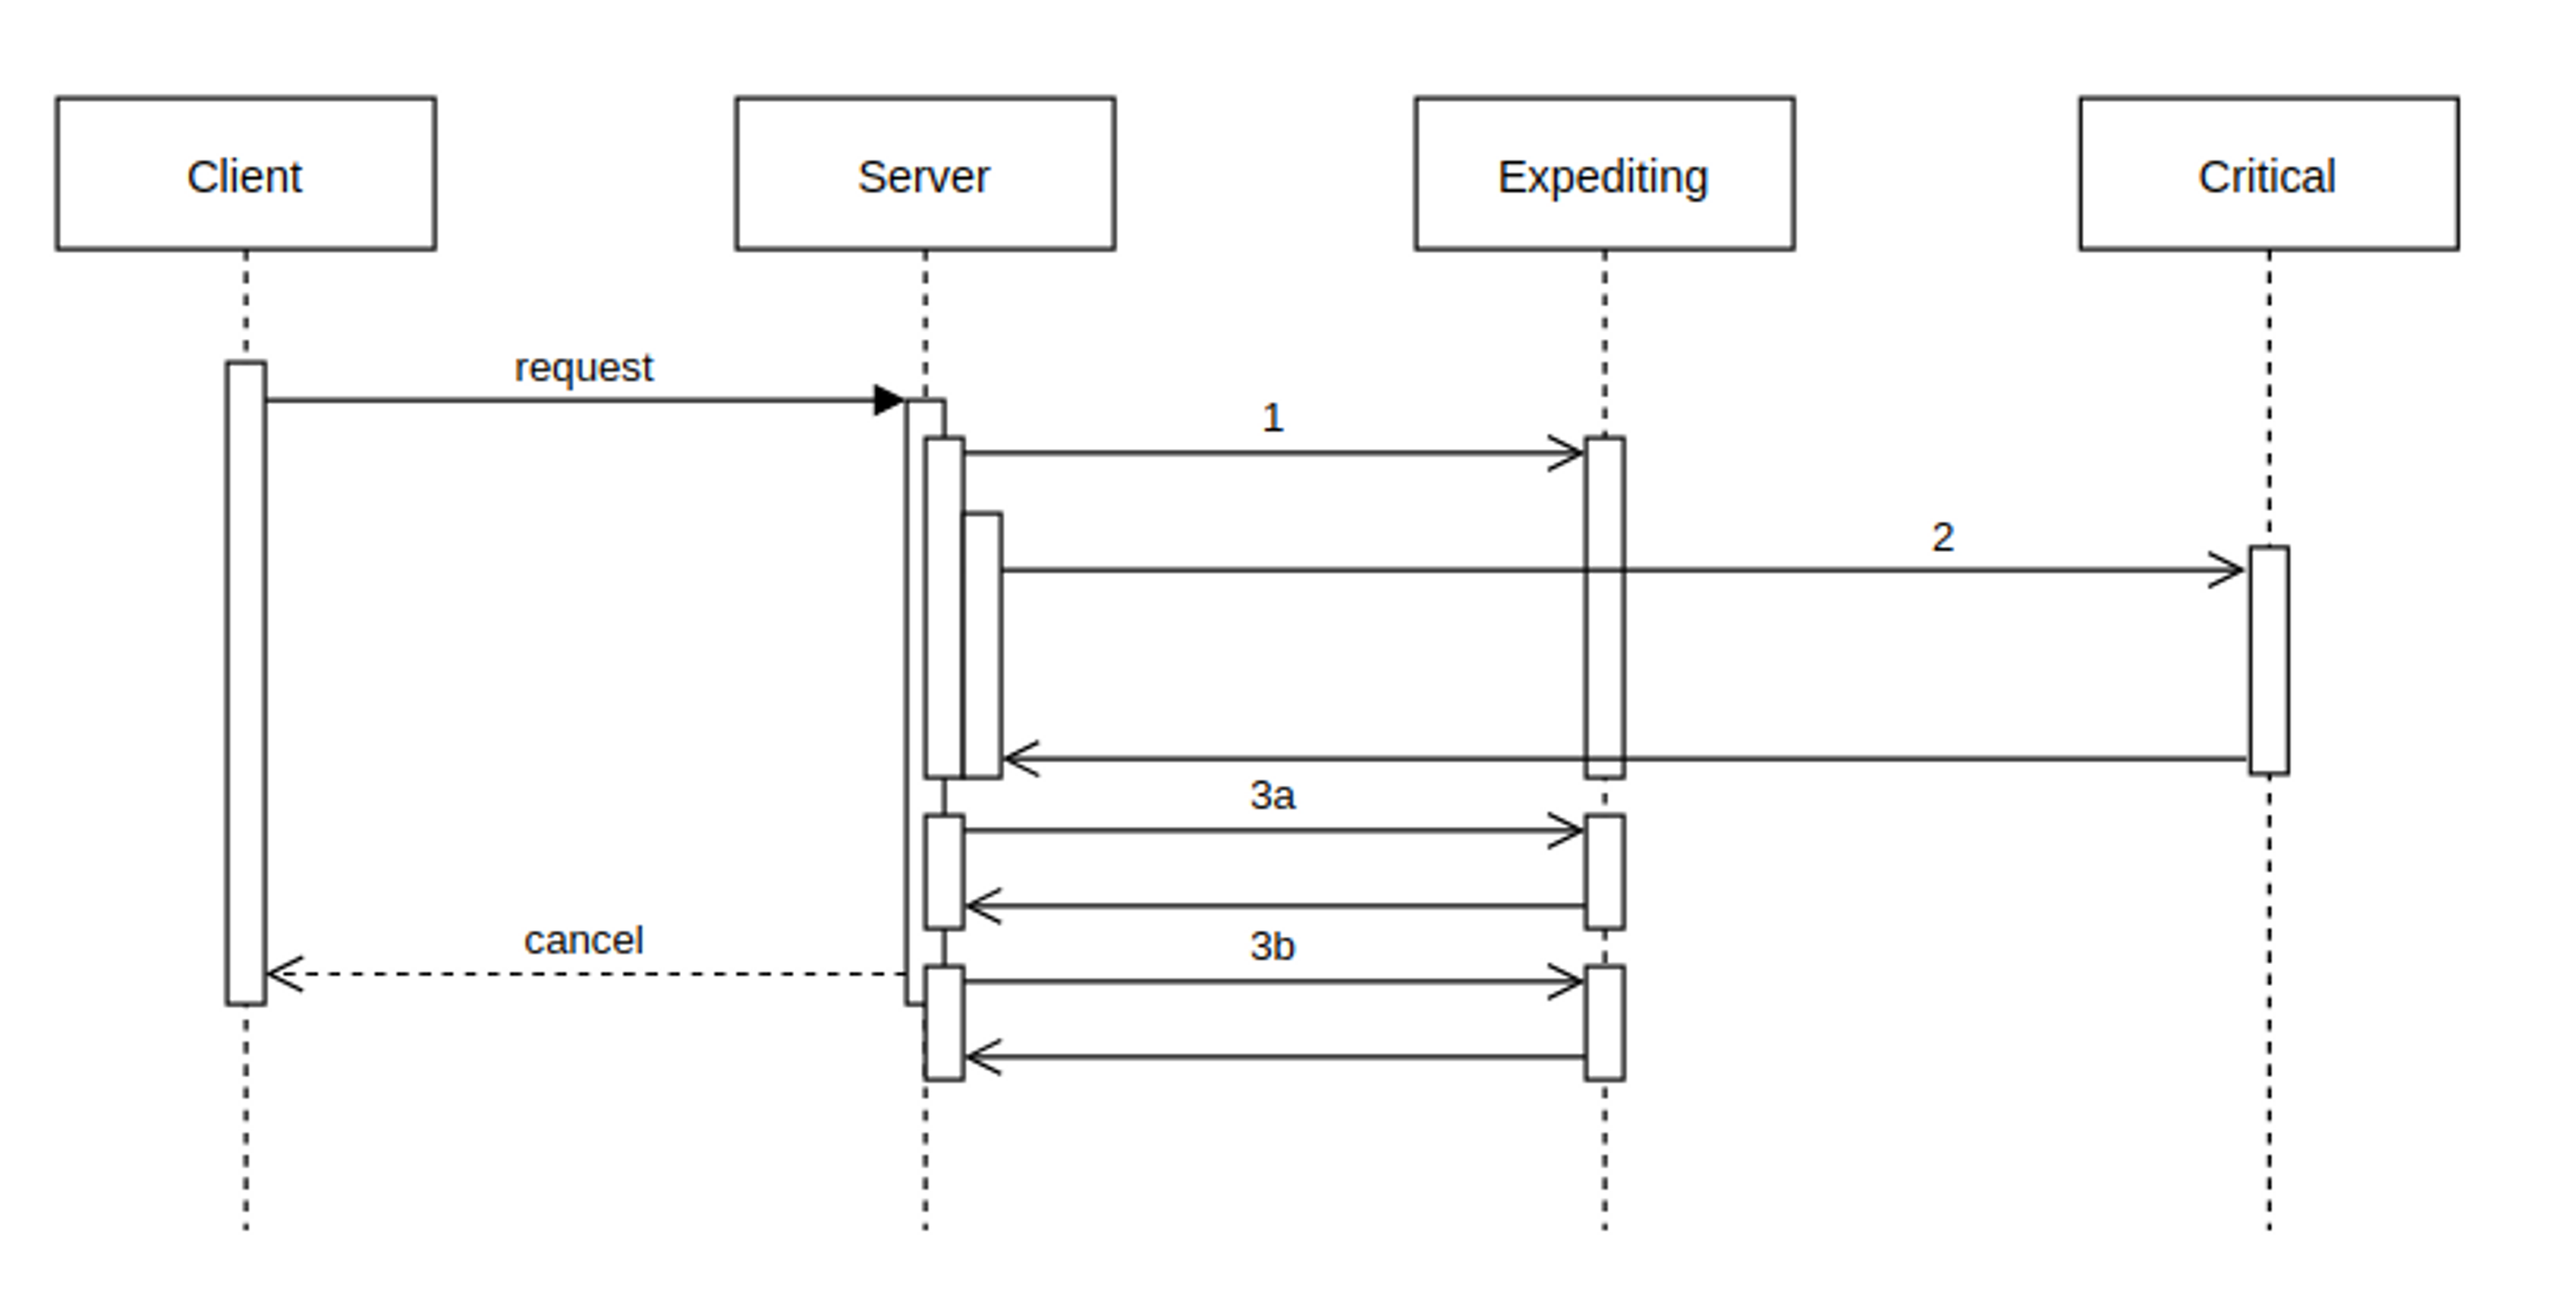 A sequence diagram with 2 parallel calls then 2 more calls quickly.